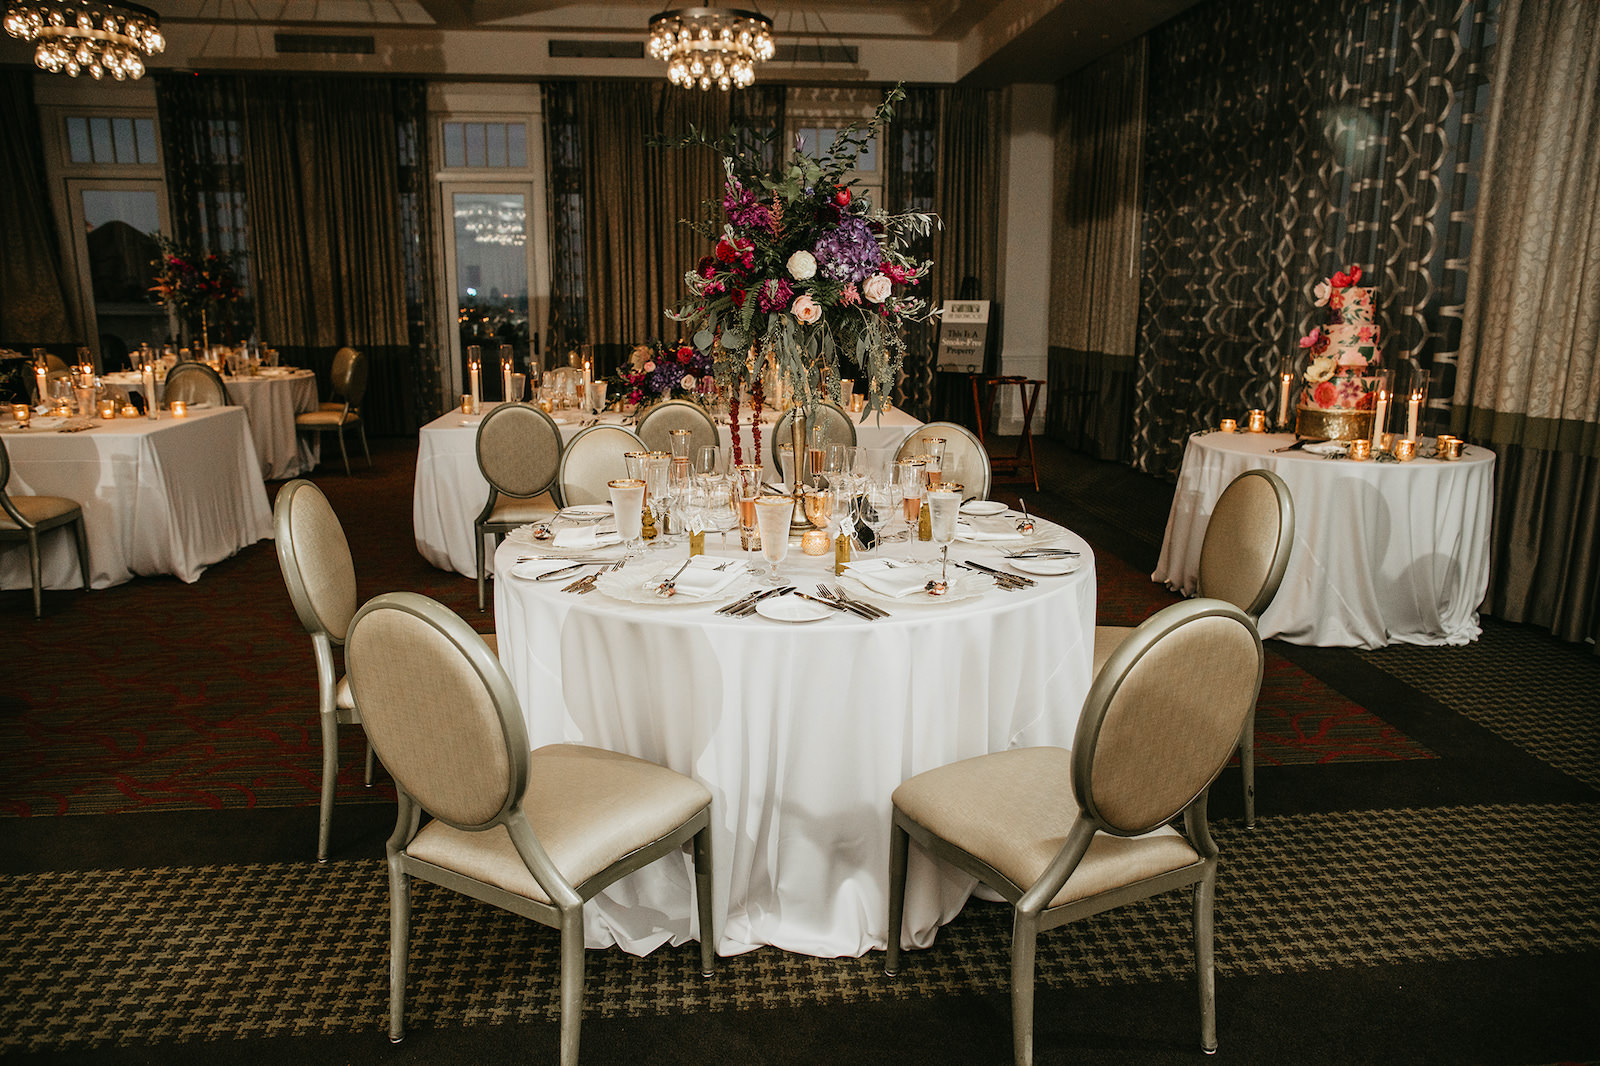 St. Pete Wedding Venue The Birchwood | Indoor Ballroom Wedding Reception with White Linen Tablecloth and Tall Floral Candlestick Centerpieces with Deep Purple and Burgundy Floral Arrangement